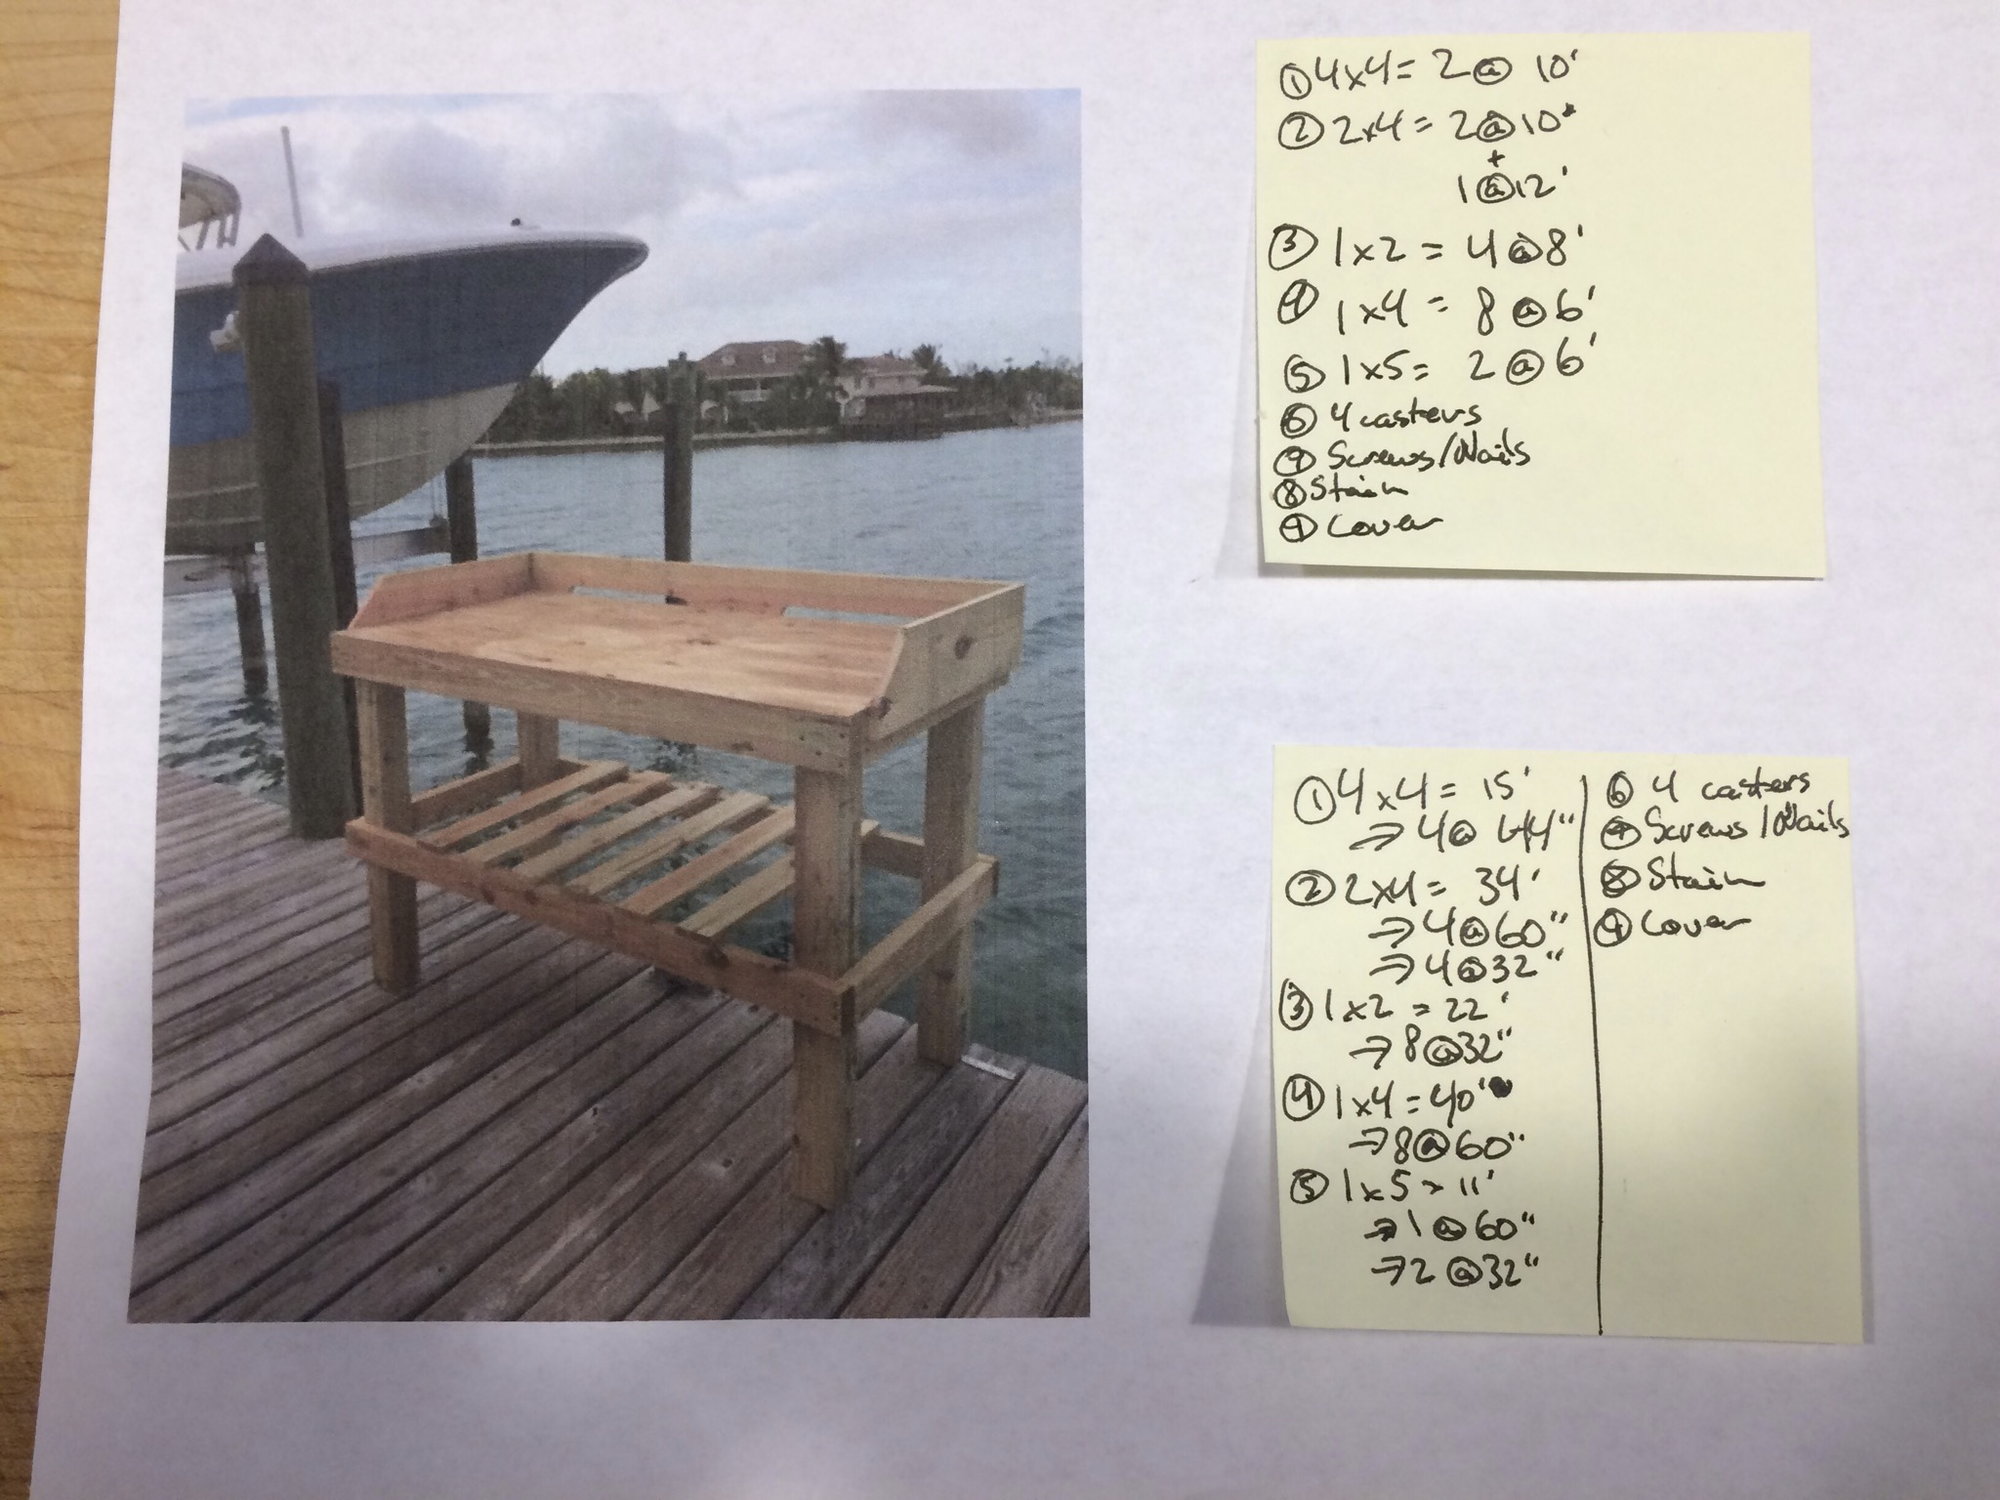 Help design my new fish cleaning station - The Hull Truth - Boating and  Fishing Forum